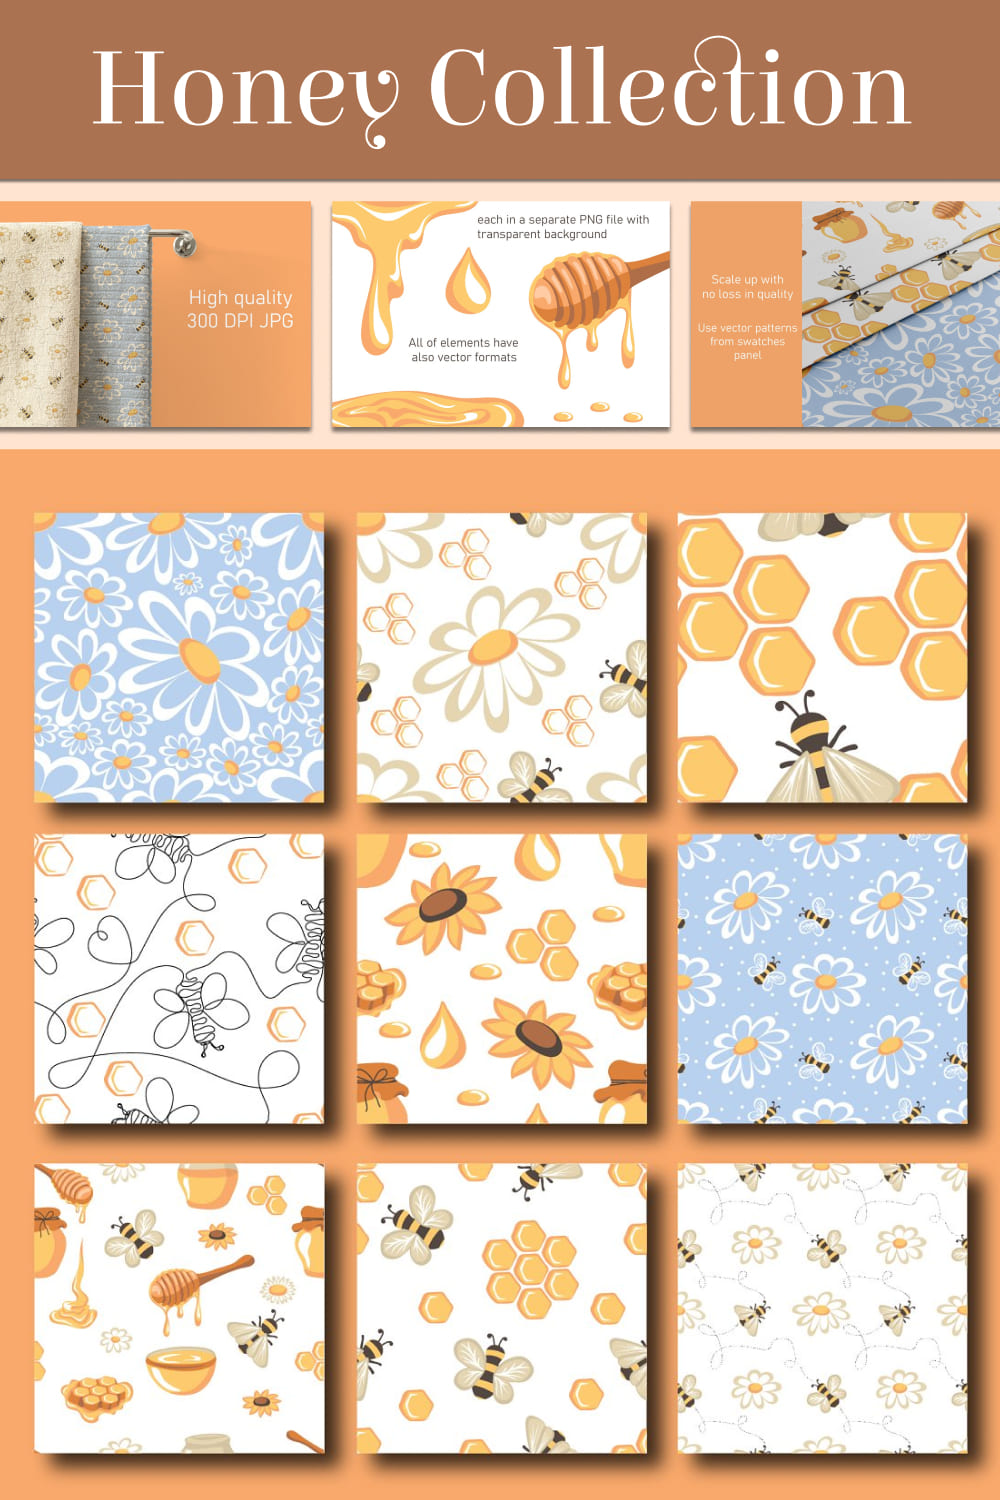 Honey collection - pinterest image preview.